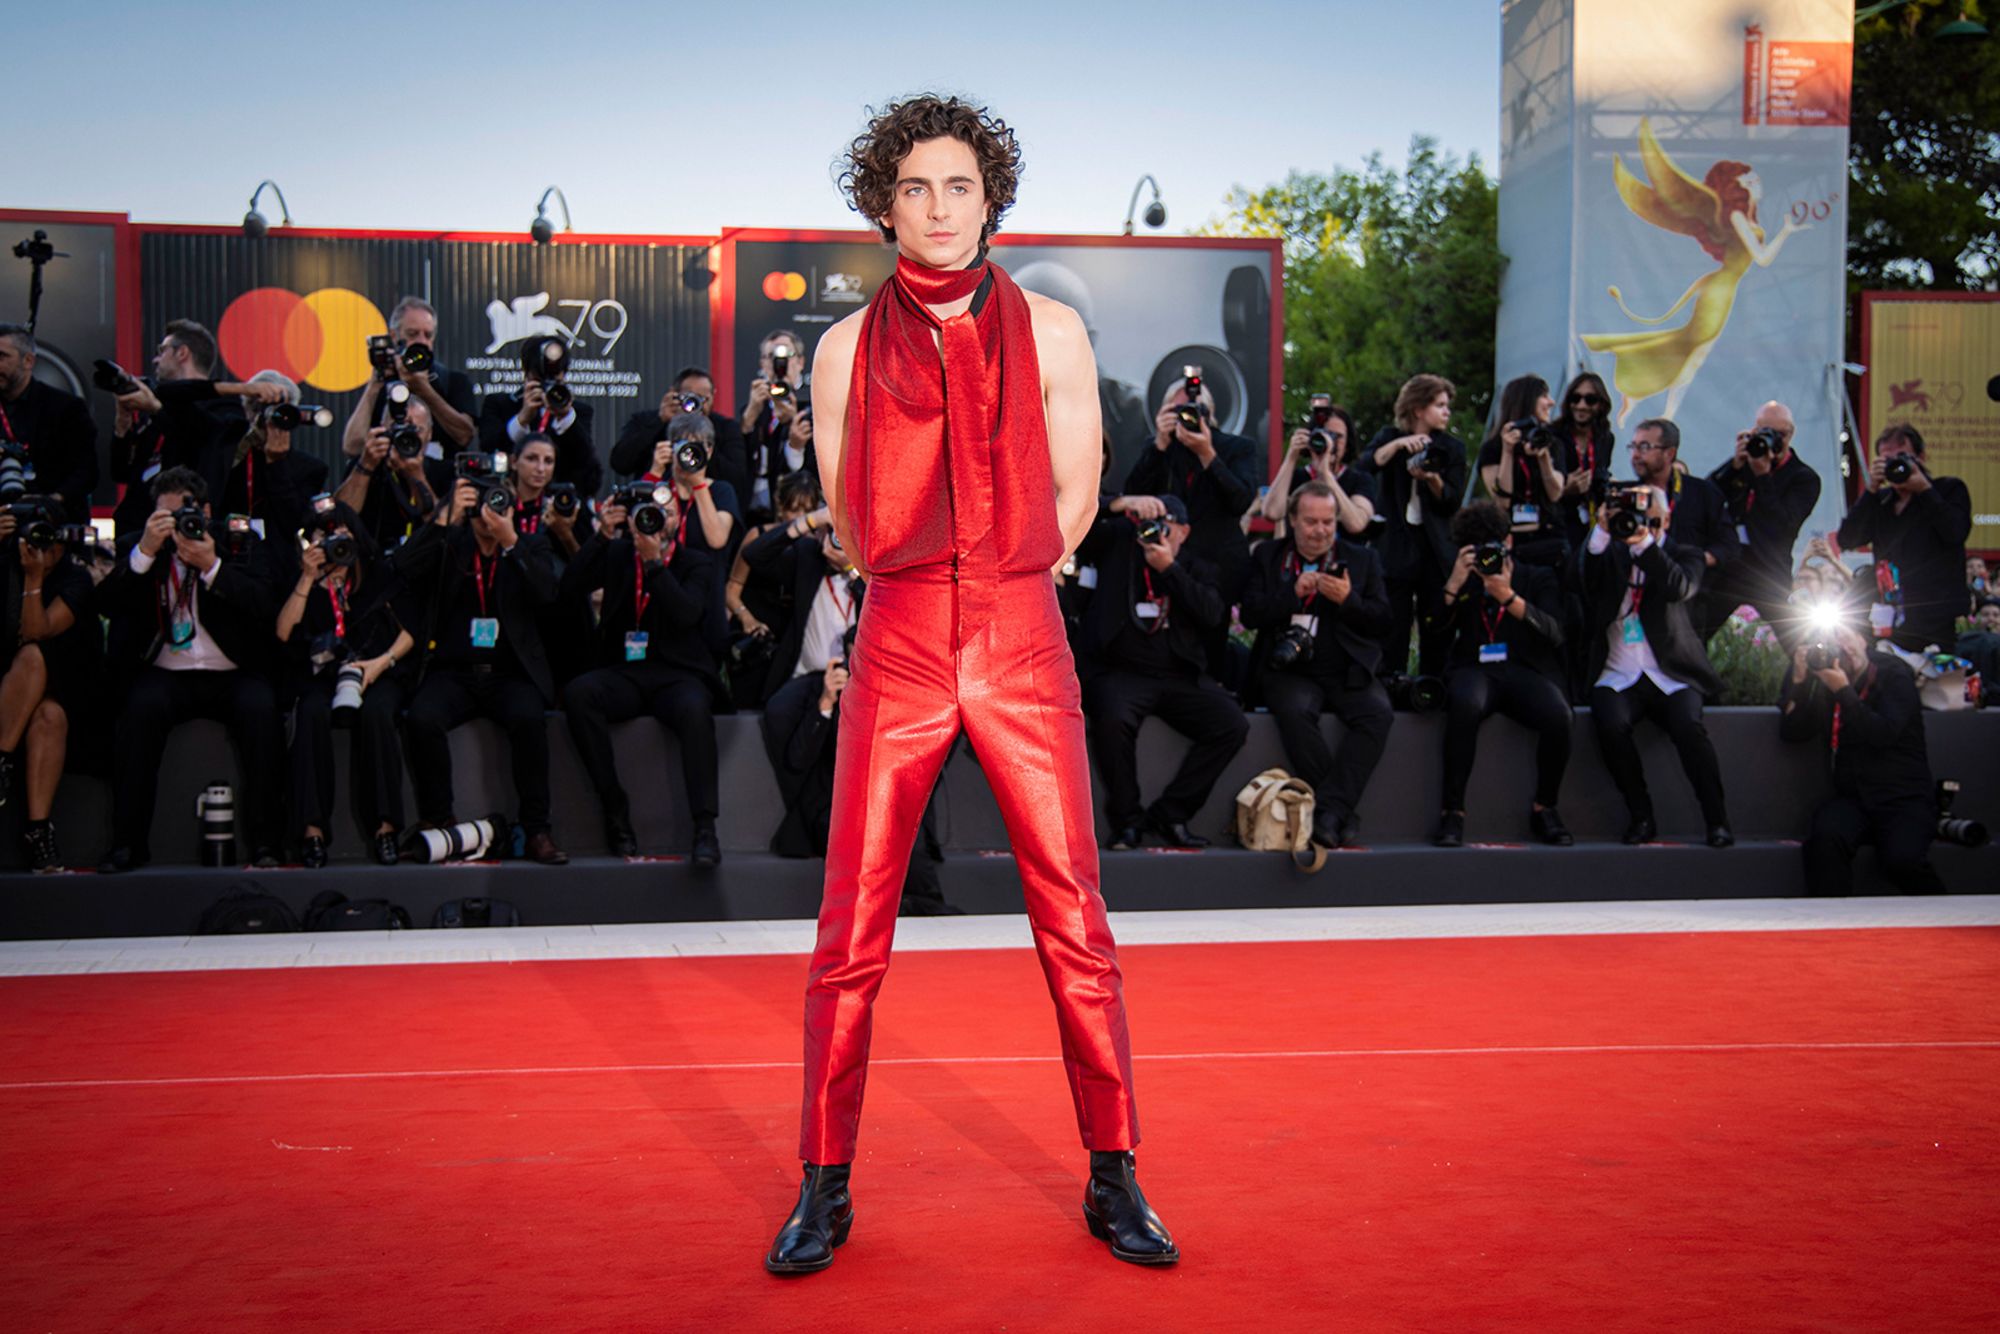 The 10 best red-carpet fashion moments from the premiere of No